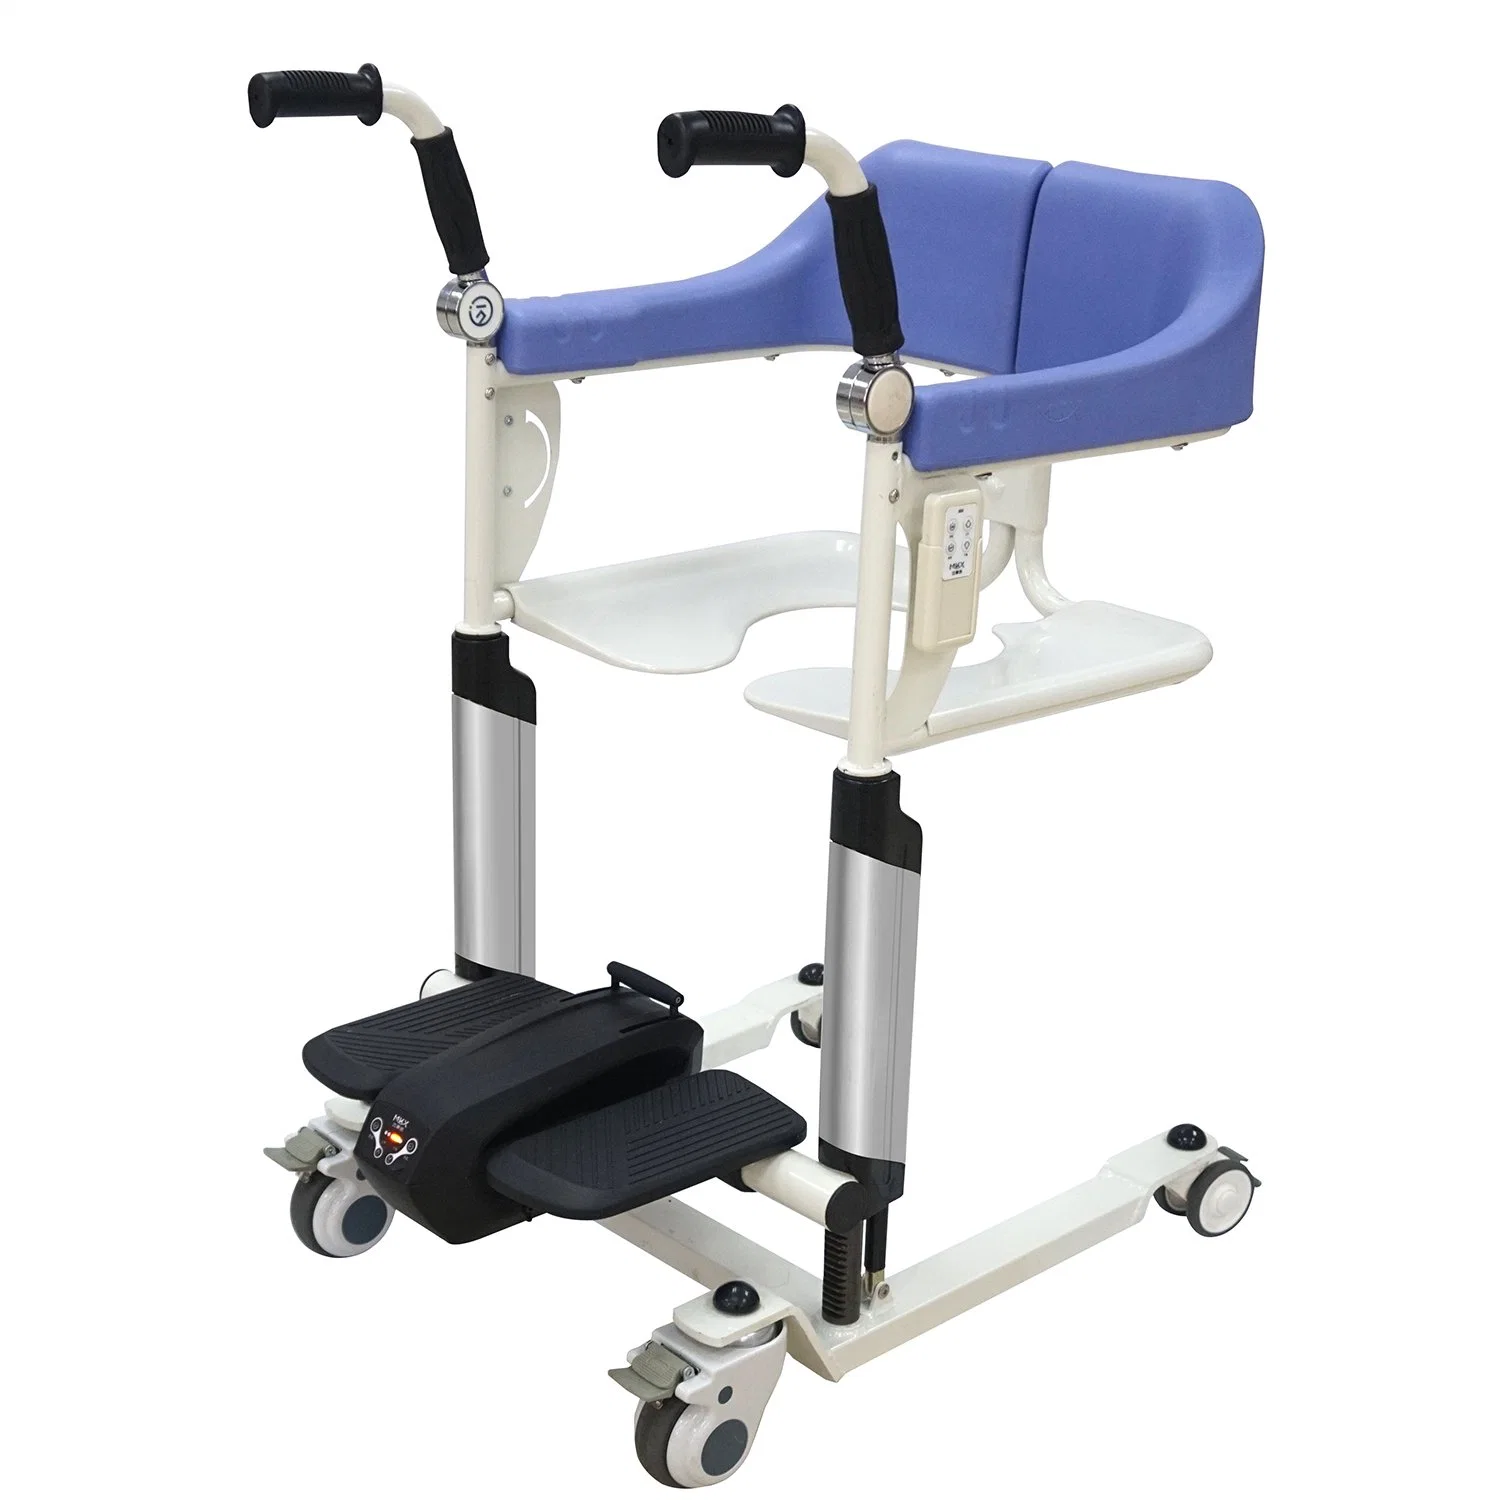 Fashion New Brother Medical Standard Export Carton Electric Patient Lifting Transfer Chair